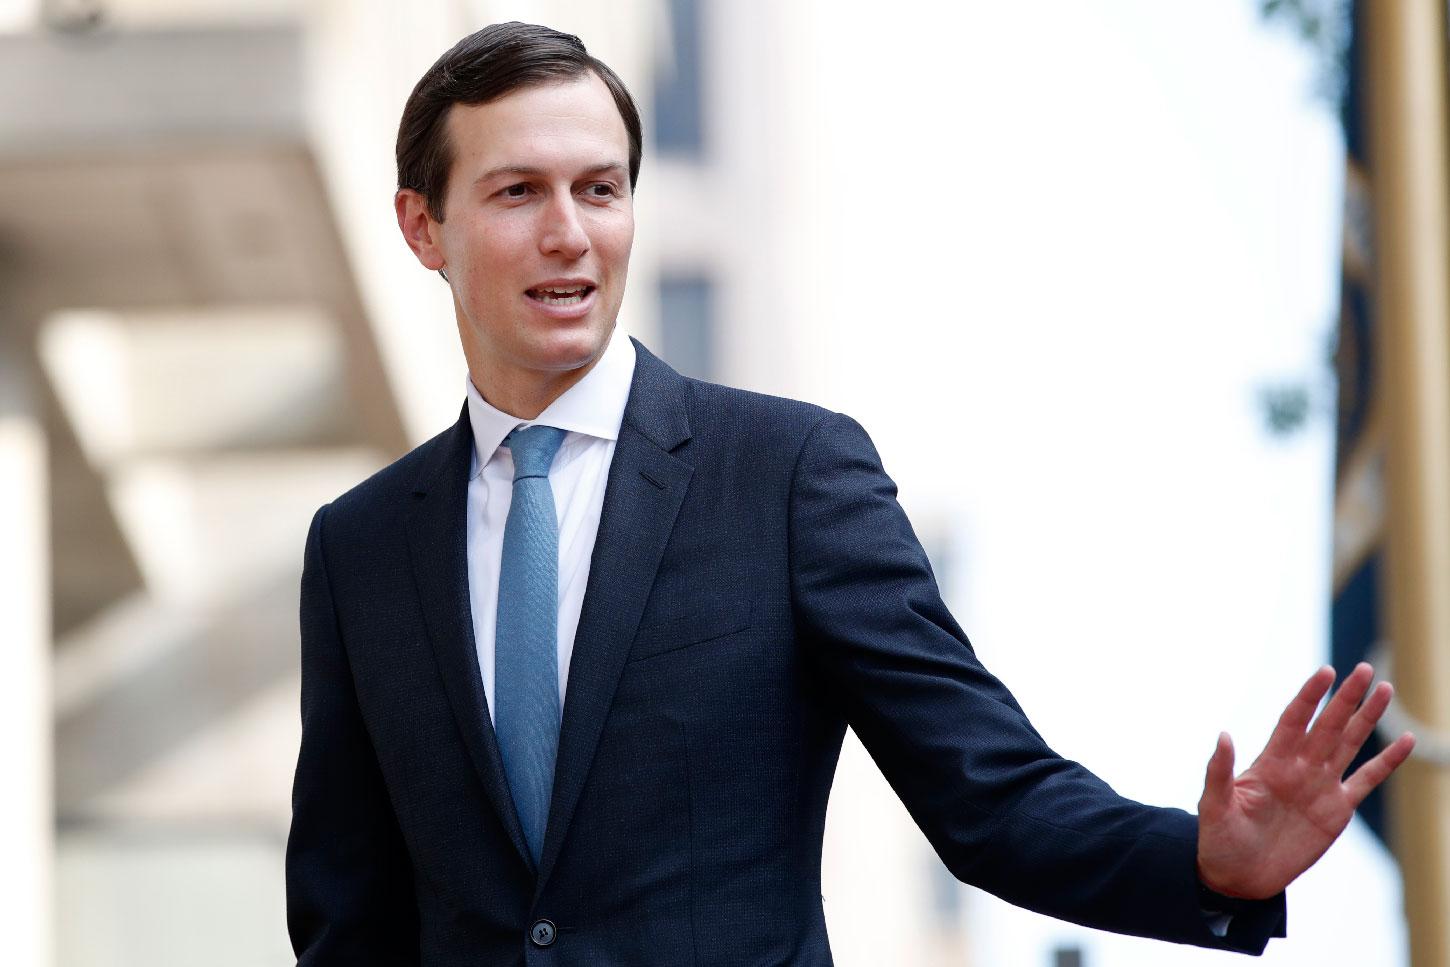 In this Aug. 29, 2018 photo, White House adviser Jared Kushner waves as he arrives at the Office of the United States Trade Representative for talks on trade with Canada, in Washington. (AP)